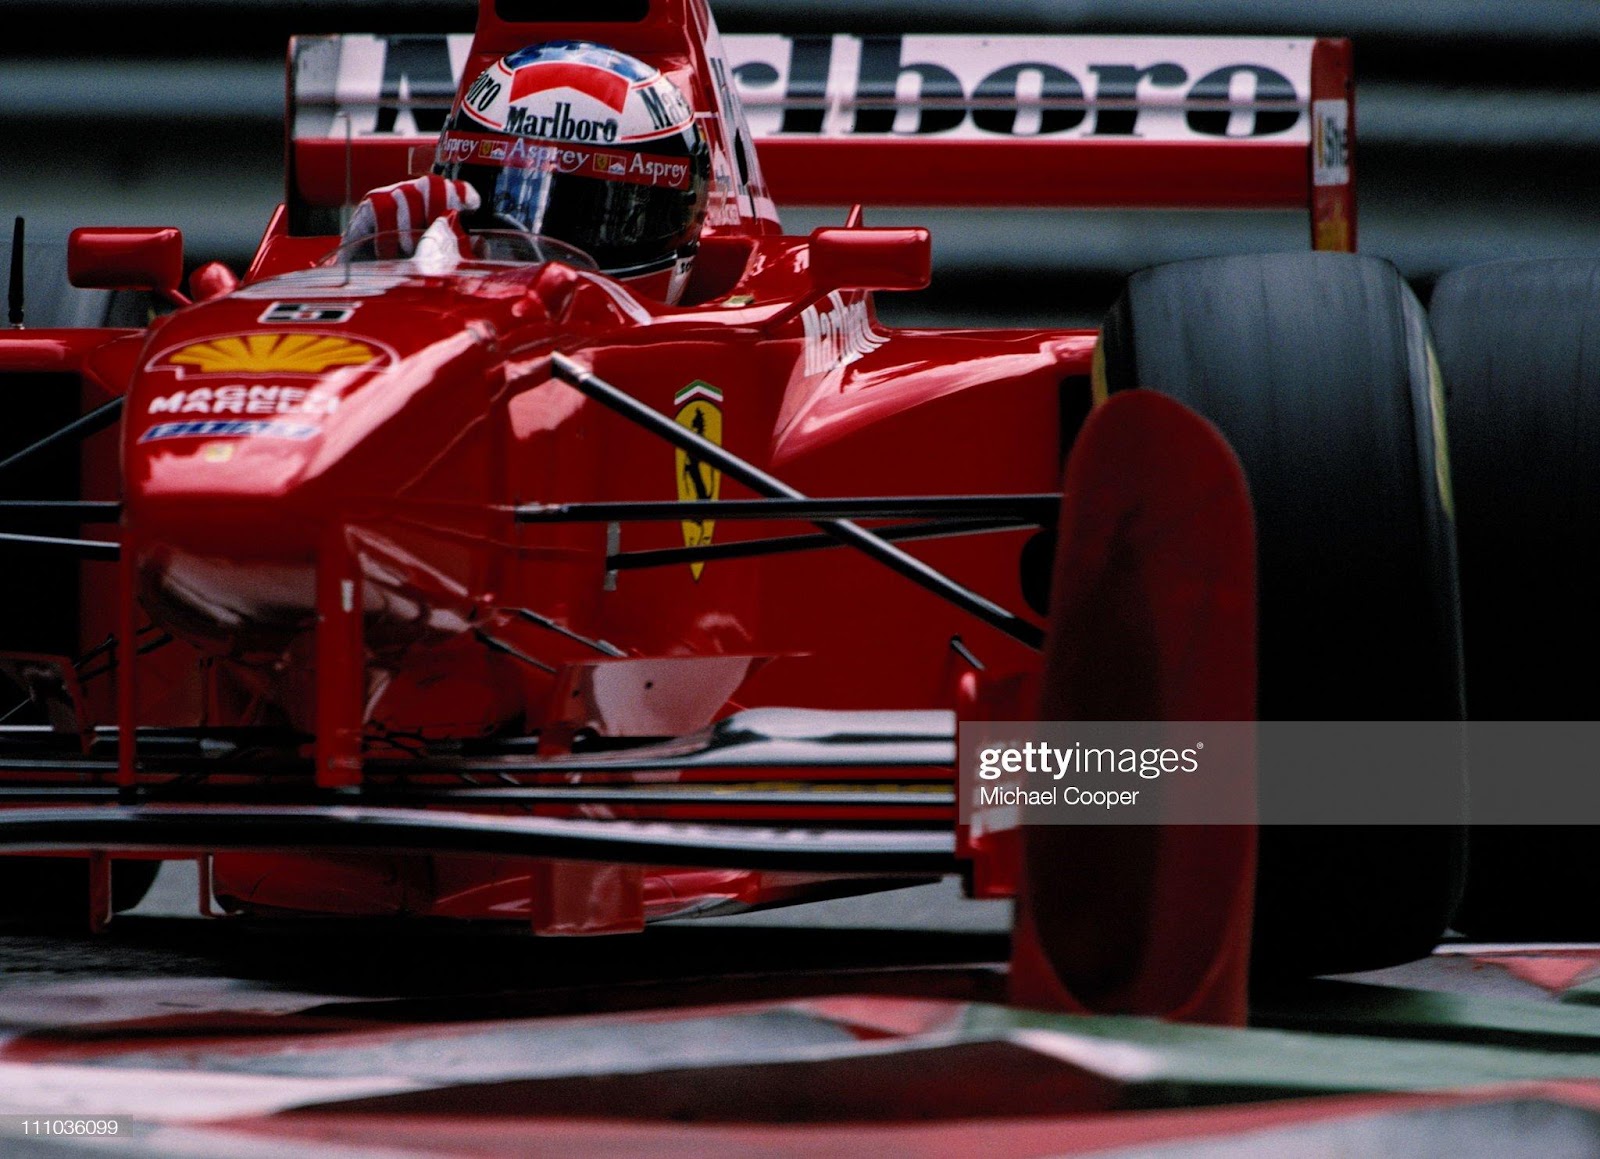 Michael Schumacher drives the n. 5 Ferrari F310B over the curbs during practice for the Belgian Grand Prix on 23rd August 1997 at the Circuit de Spa-Francorchamps. 